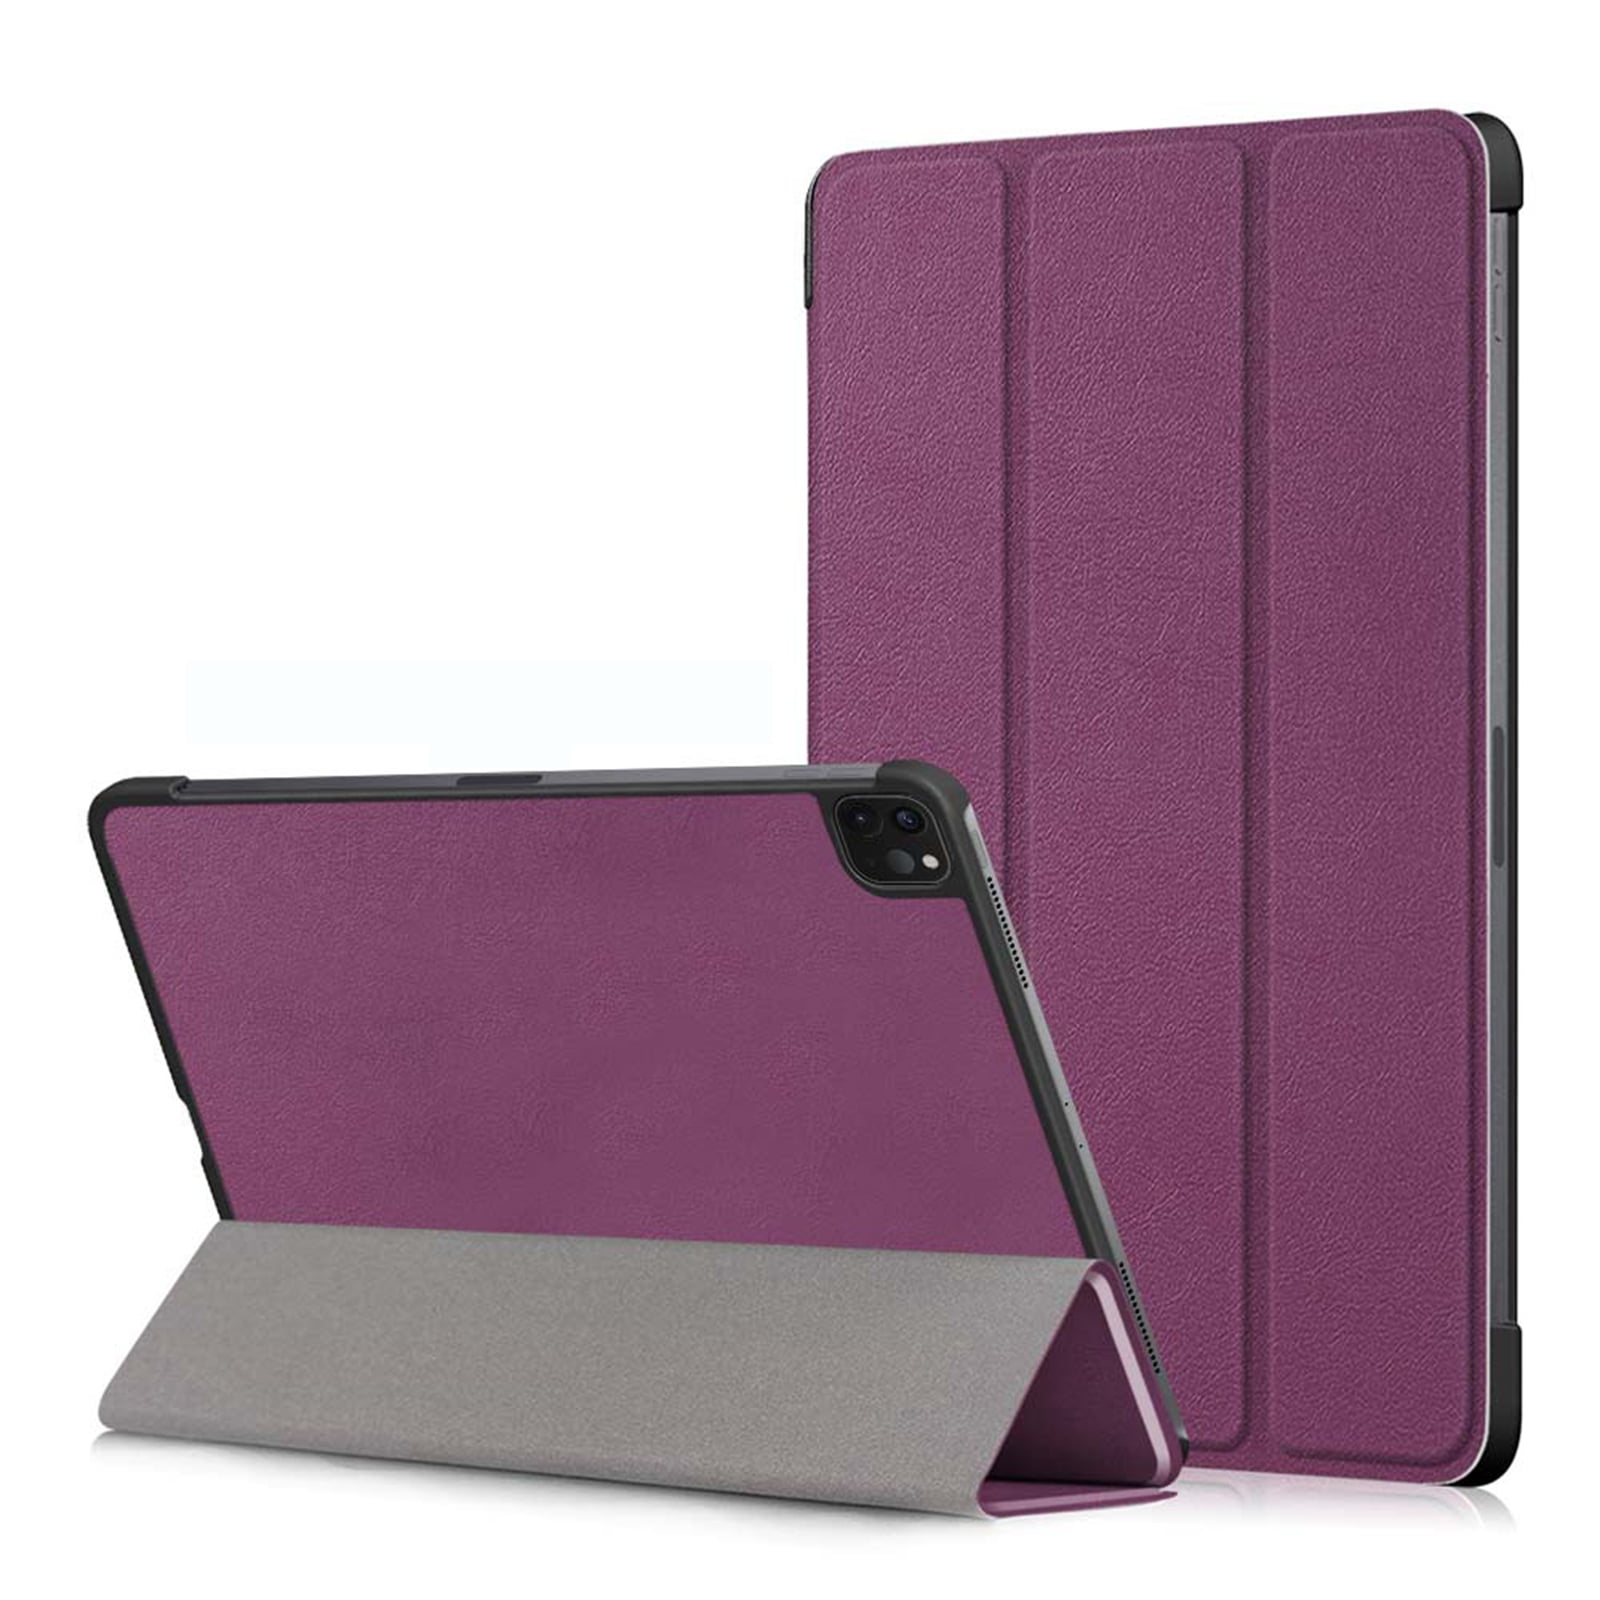 Case for iPad Air 5th Gen/iPad Air 4 10.9 inch, for iPad Pro 11 inch Case  2022 2021 2020 2018, Dteck PU Leather Folding Stand Folio Protective Cover